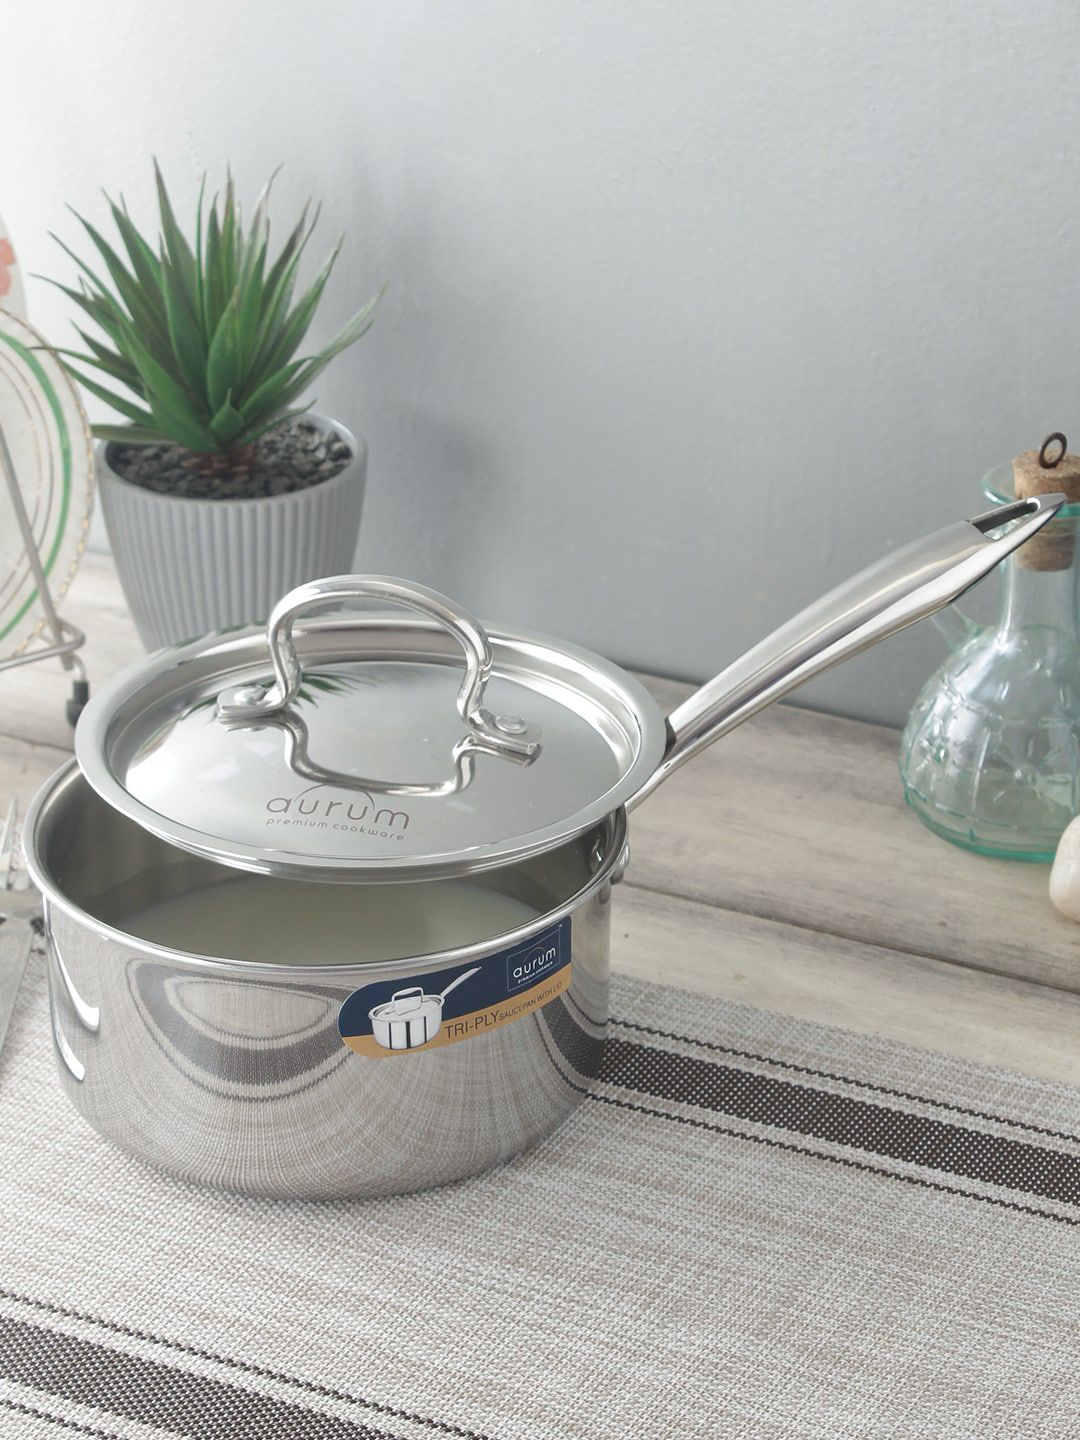 AURUM Silver-toned Saucepan with Stainless Steel Lid 1.4L Price in India